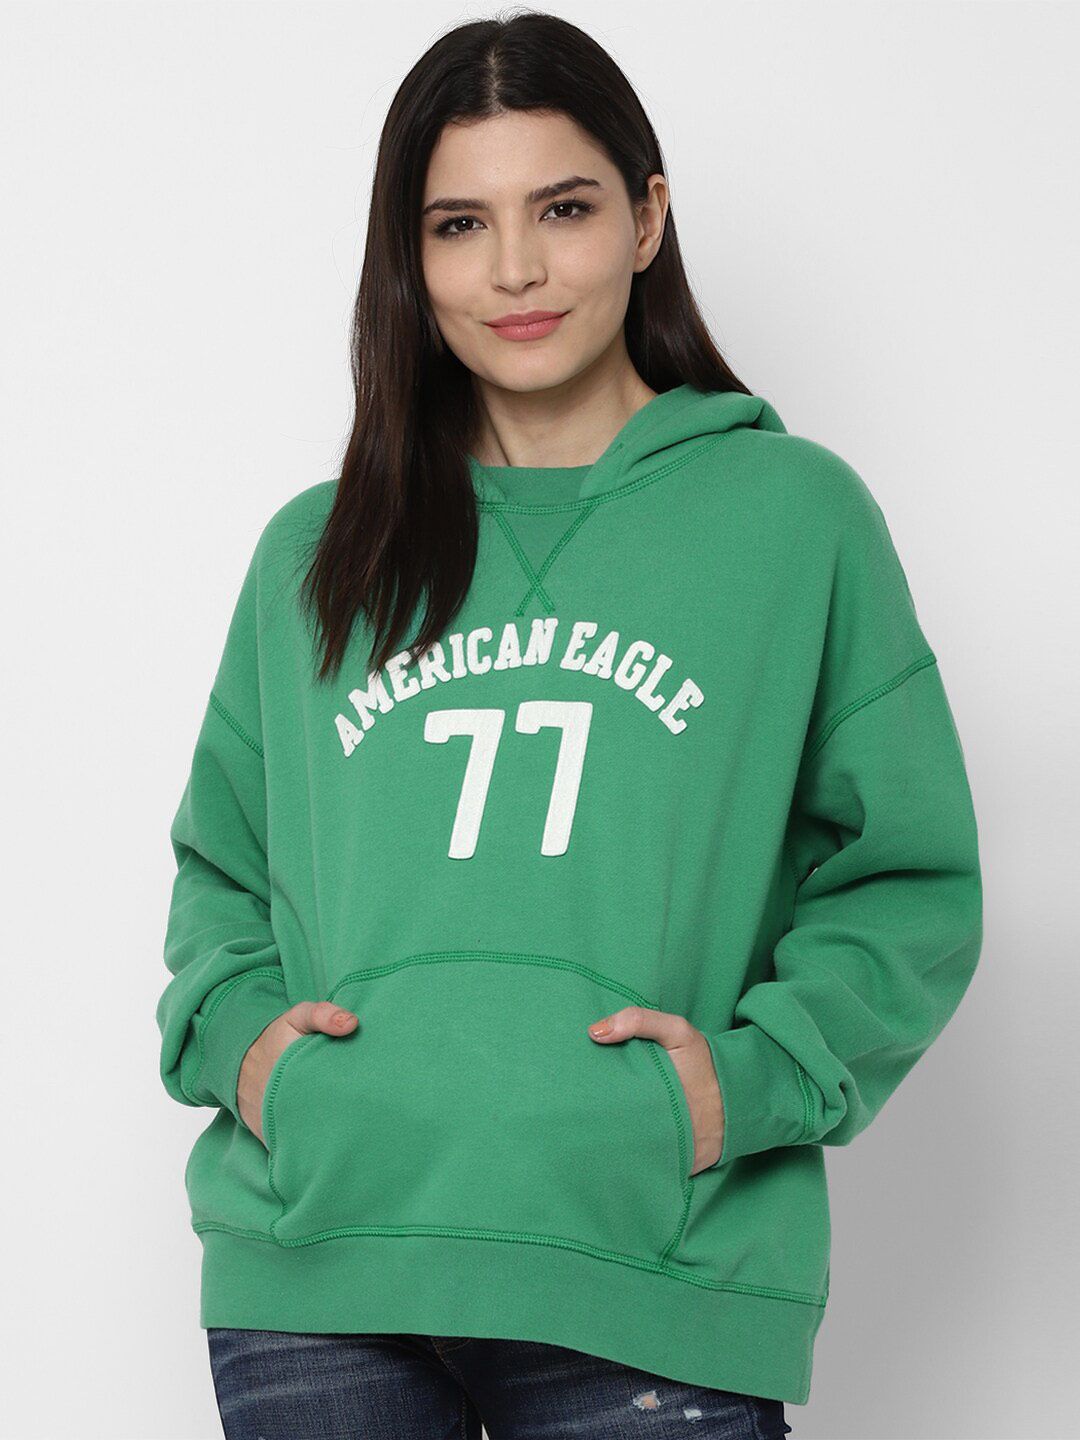 AMERICAN EAGLE OUTFITTERS Women Green Printed Hooded Sweatshirt Price in India